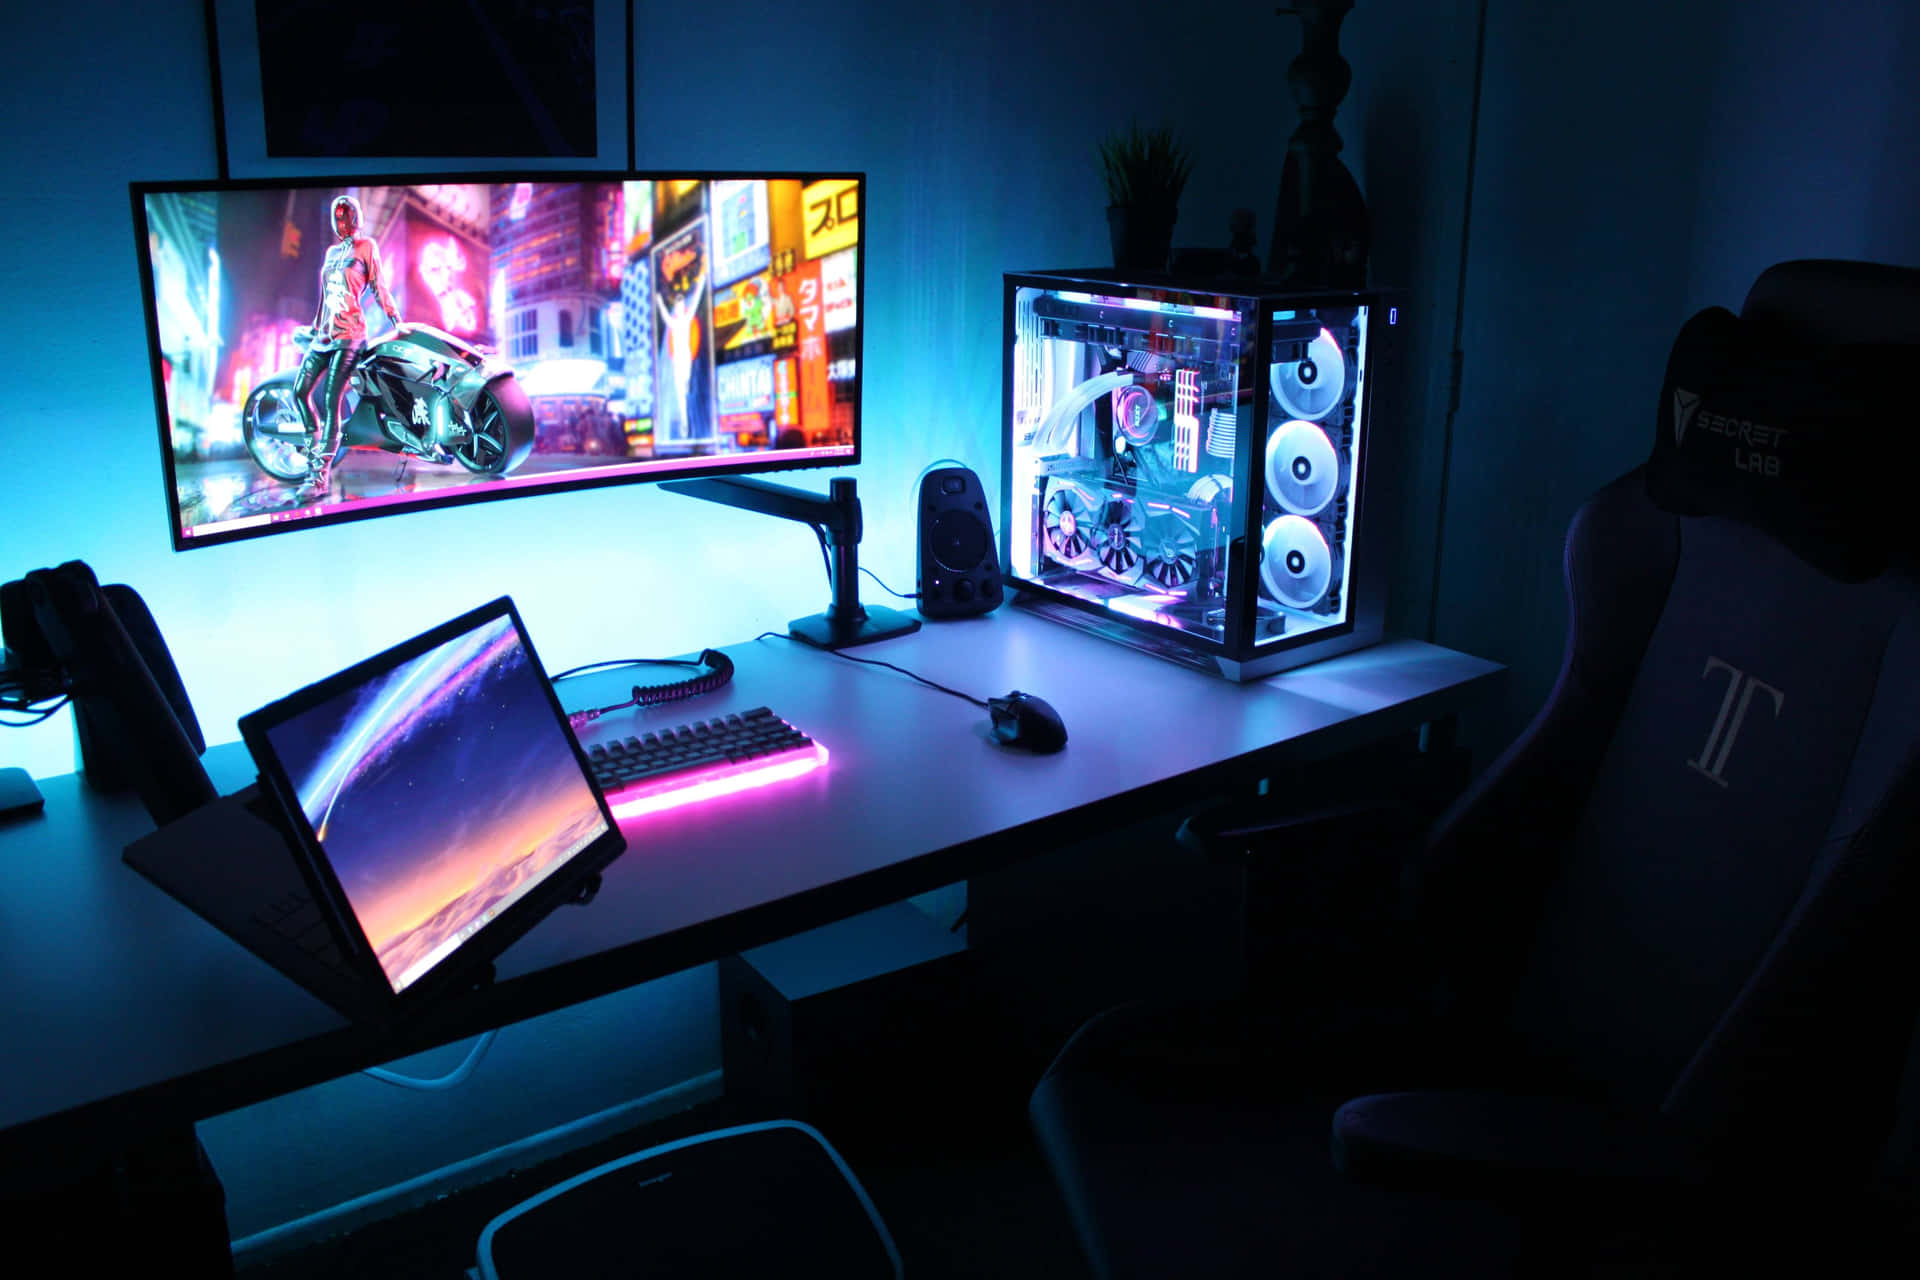 Enter a new world of gaming with a powerful PC setup Wallpaper